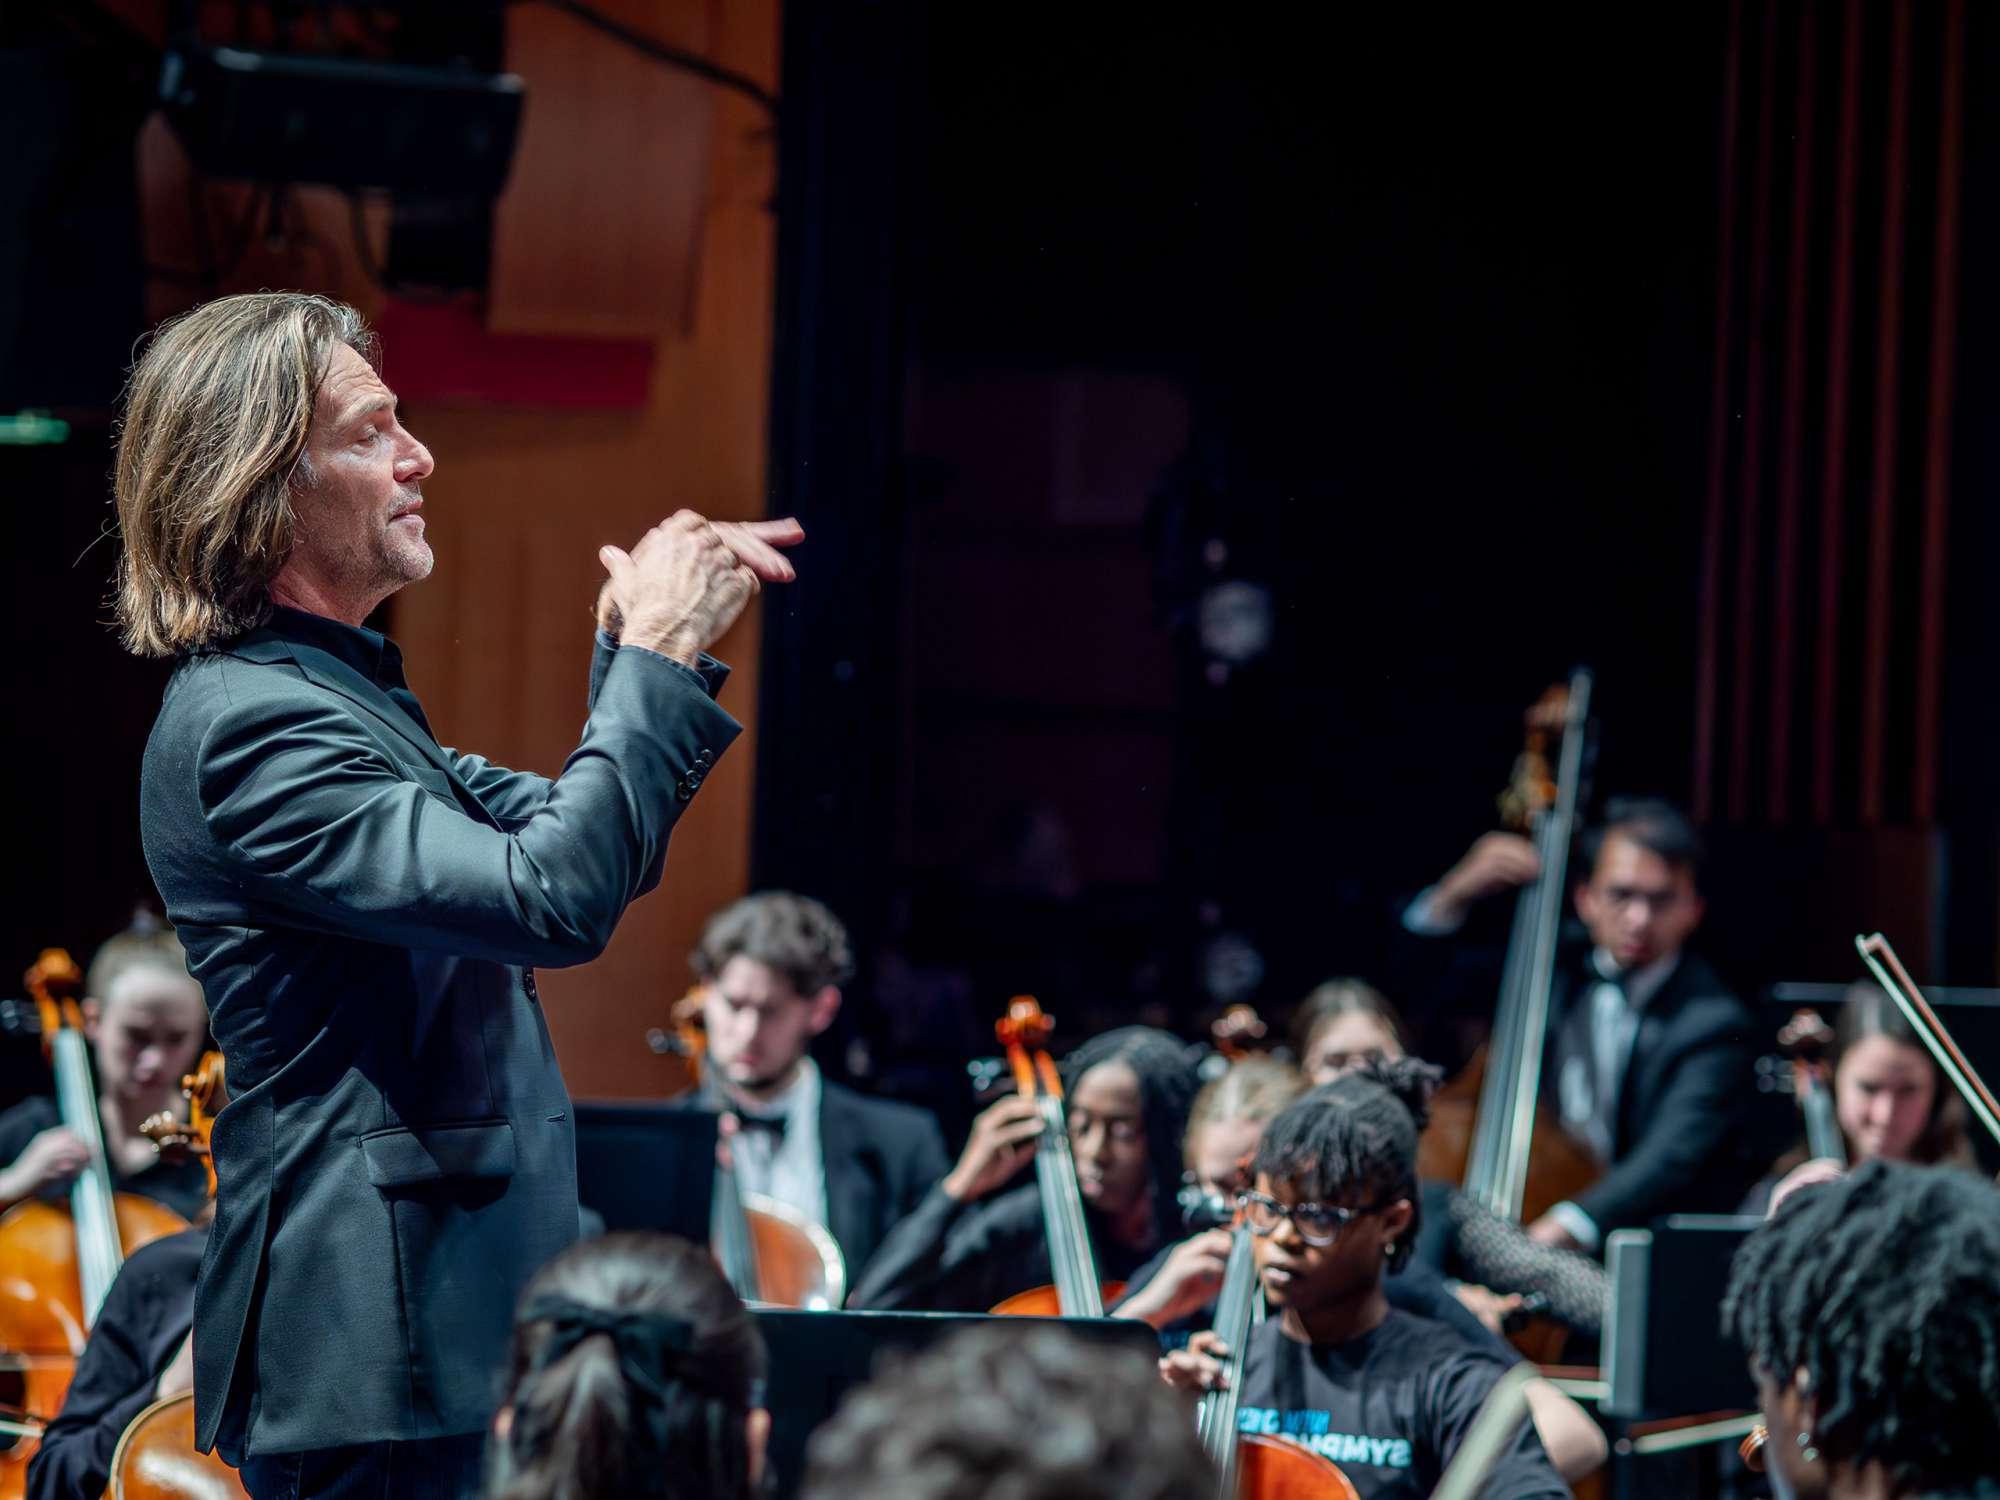 A man conducts an orchestra